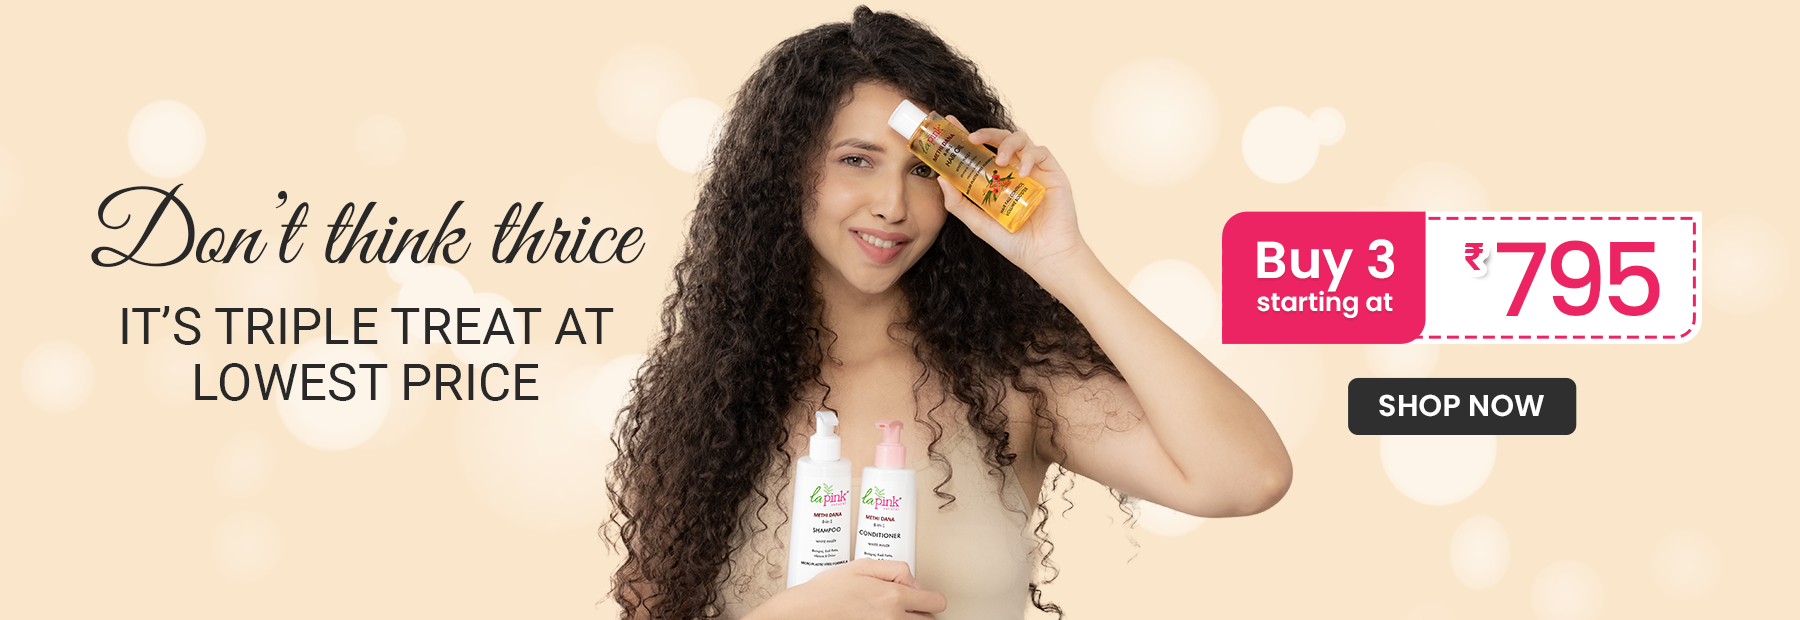 Buy 3 and Get Exciting offers on La Pink 100% Microplastic Free Formulation Based products